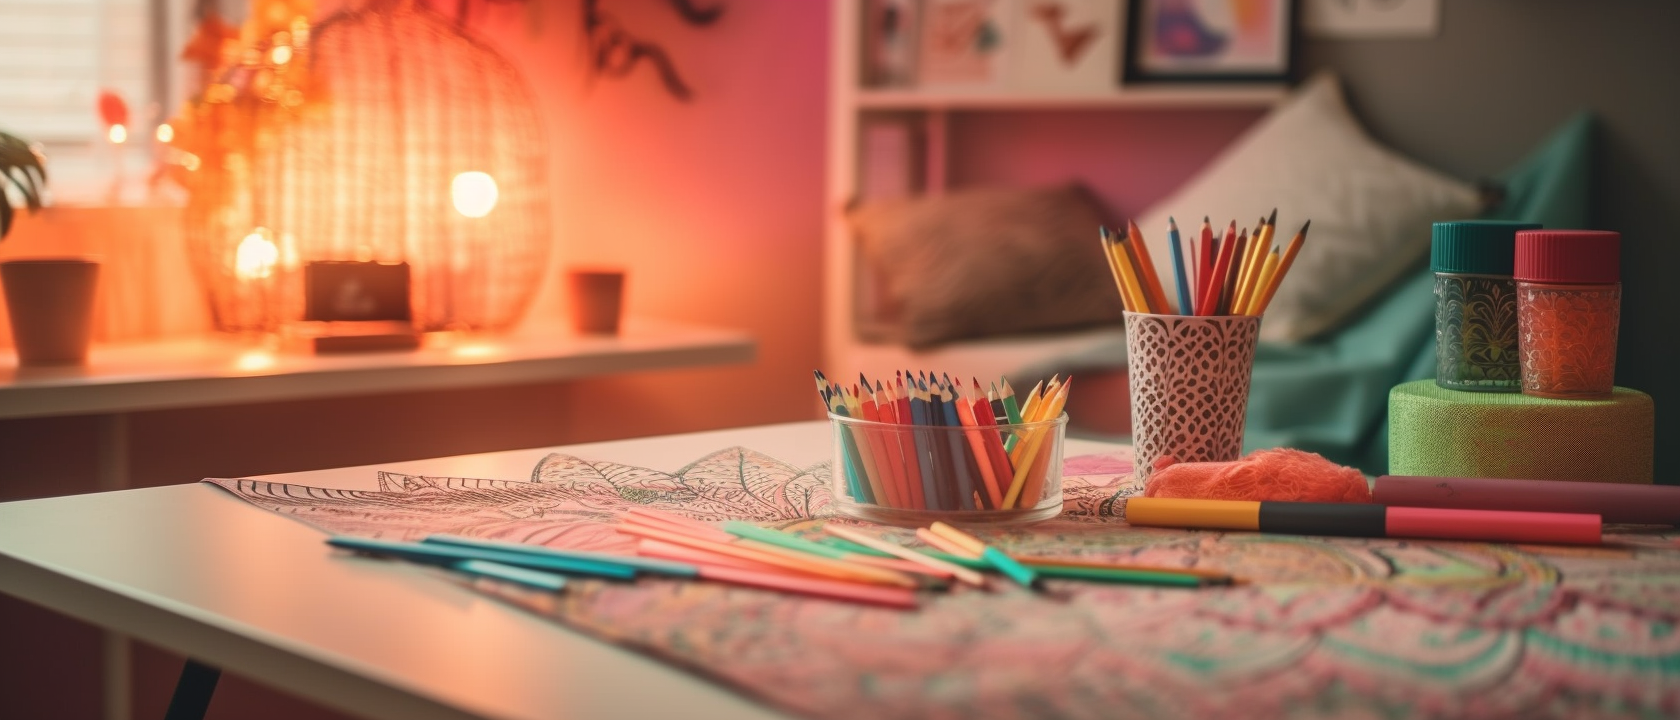 gkkdesign_teen_girl_room_coloring_pages_on_the_desk_pencils_pas_31e8683f-05b2-4f1a-b3f8-c0d260cf6d76.png